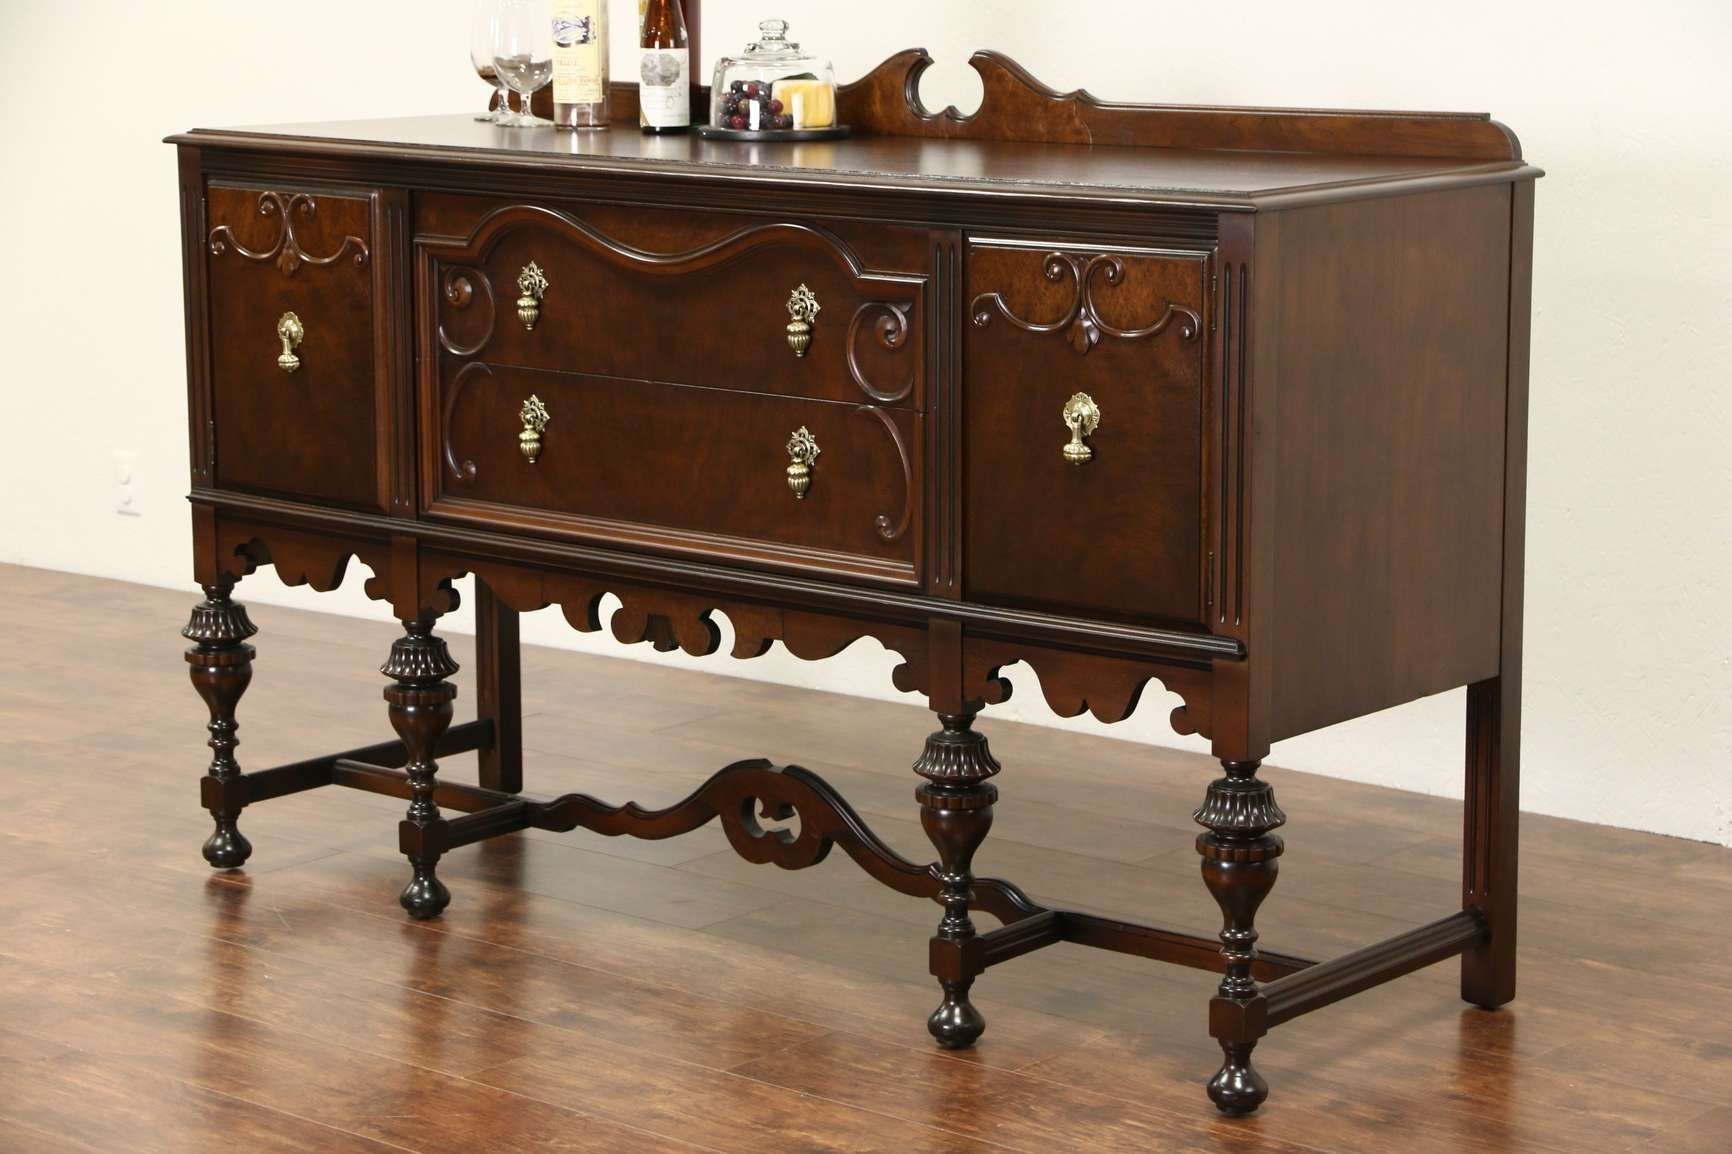 Sold – English Tudor 1920 Antique Walnut Sideboard Server Or In Vintage Sideboards And Buffets (View 12 of 20)